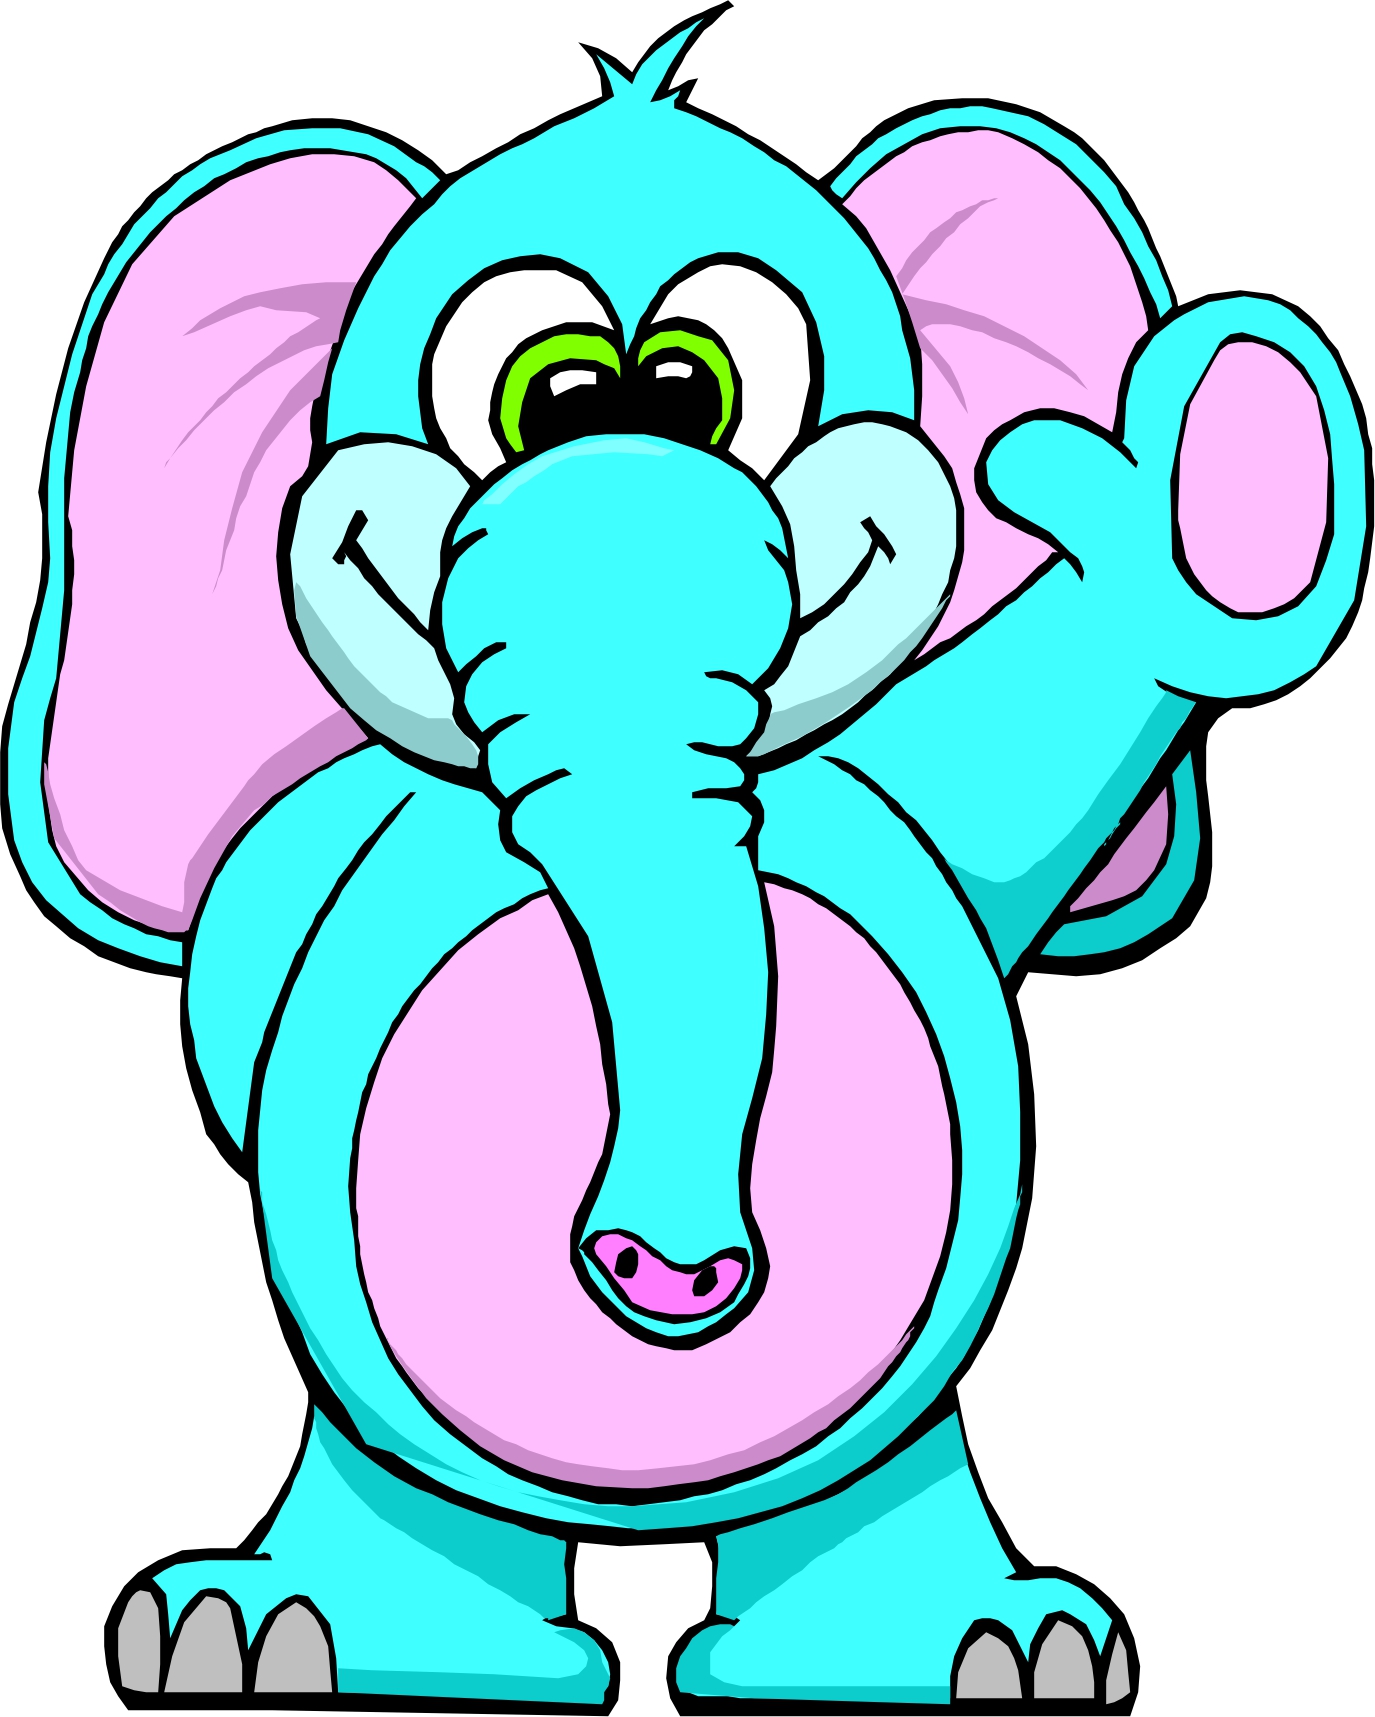 Cartoon Pictures Images 2013: Elephant Cartoon Pictures Free ...